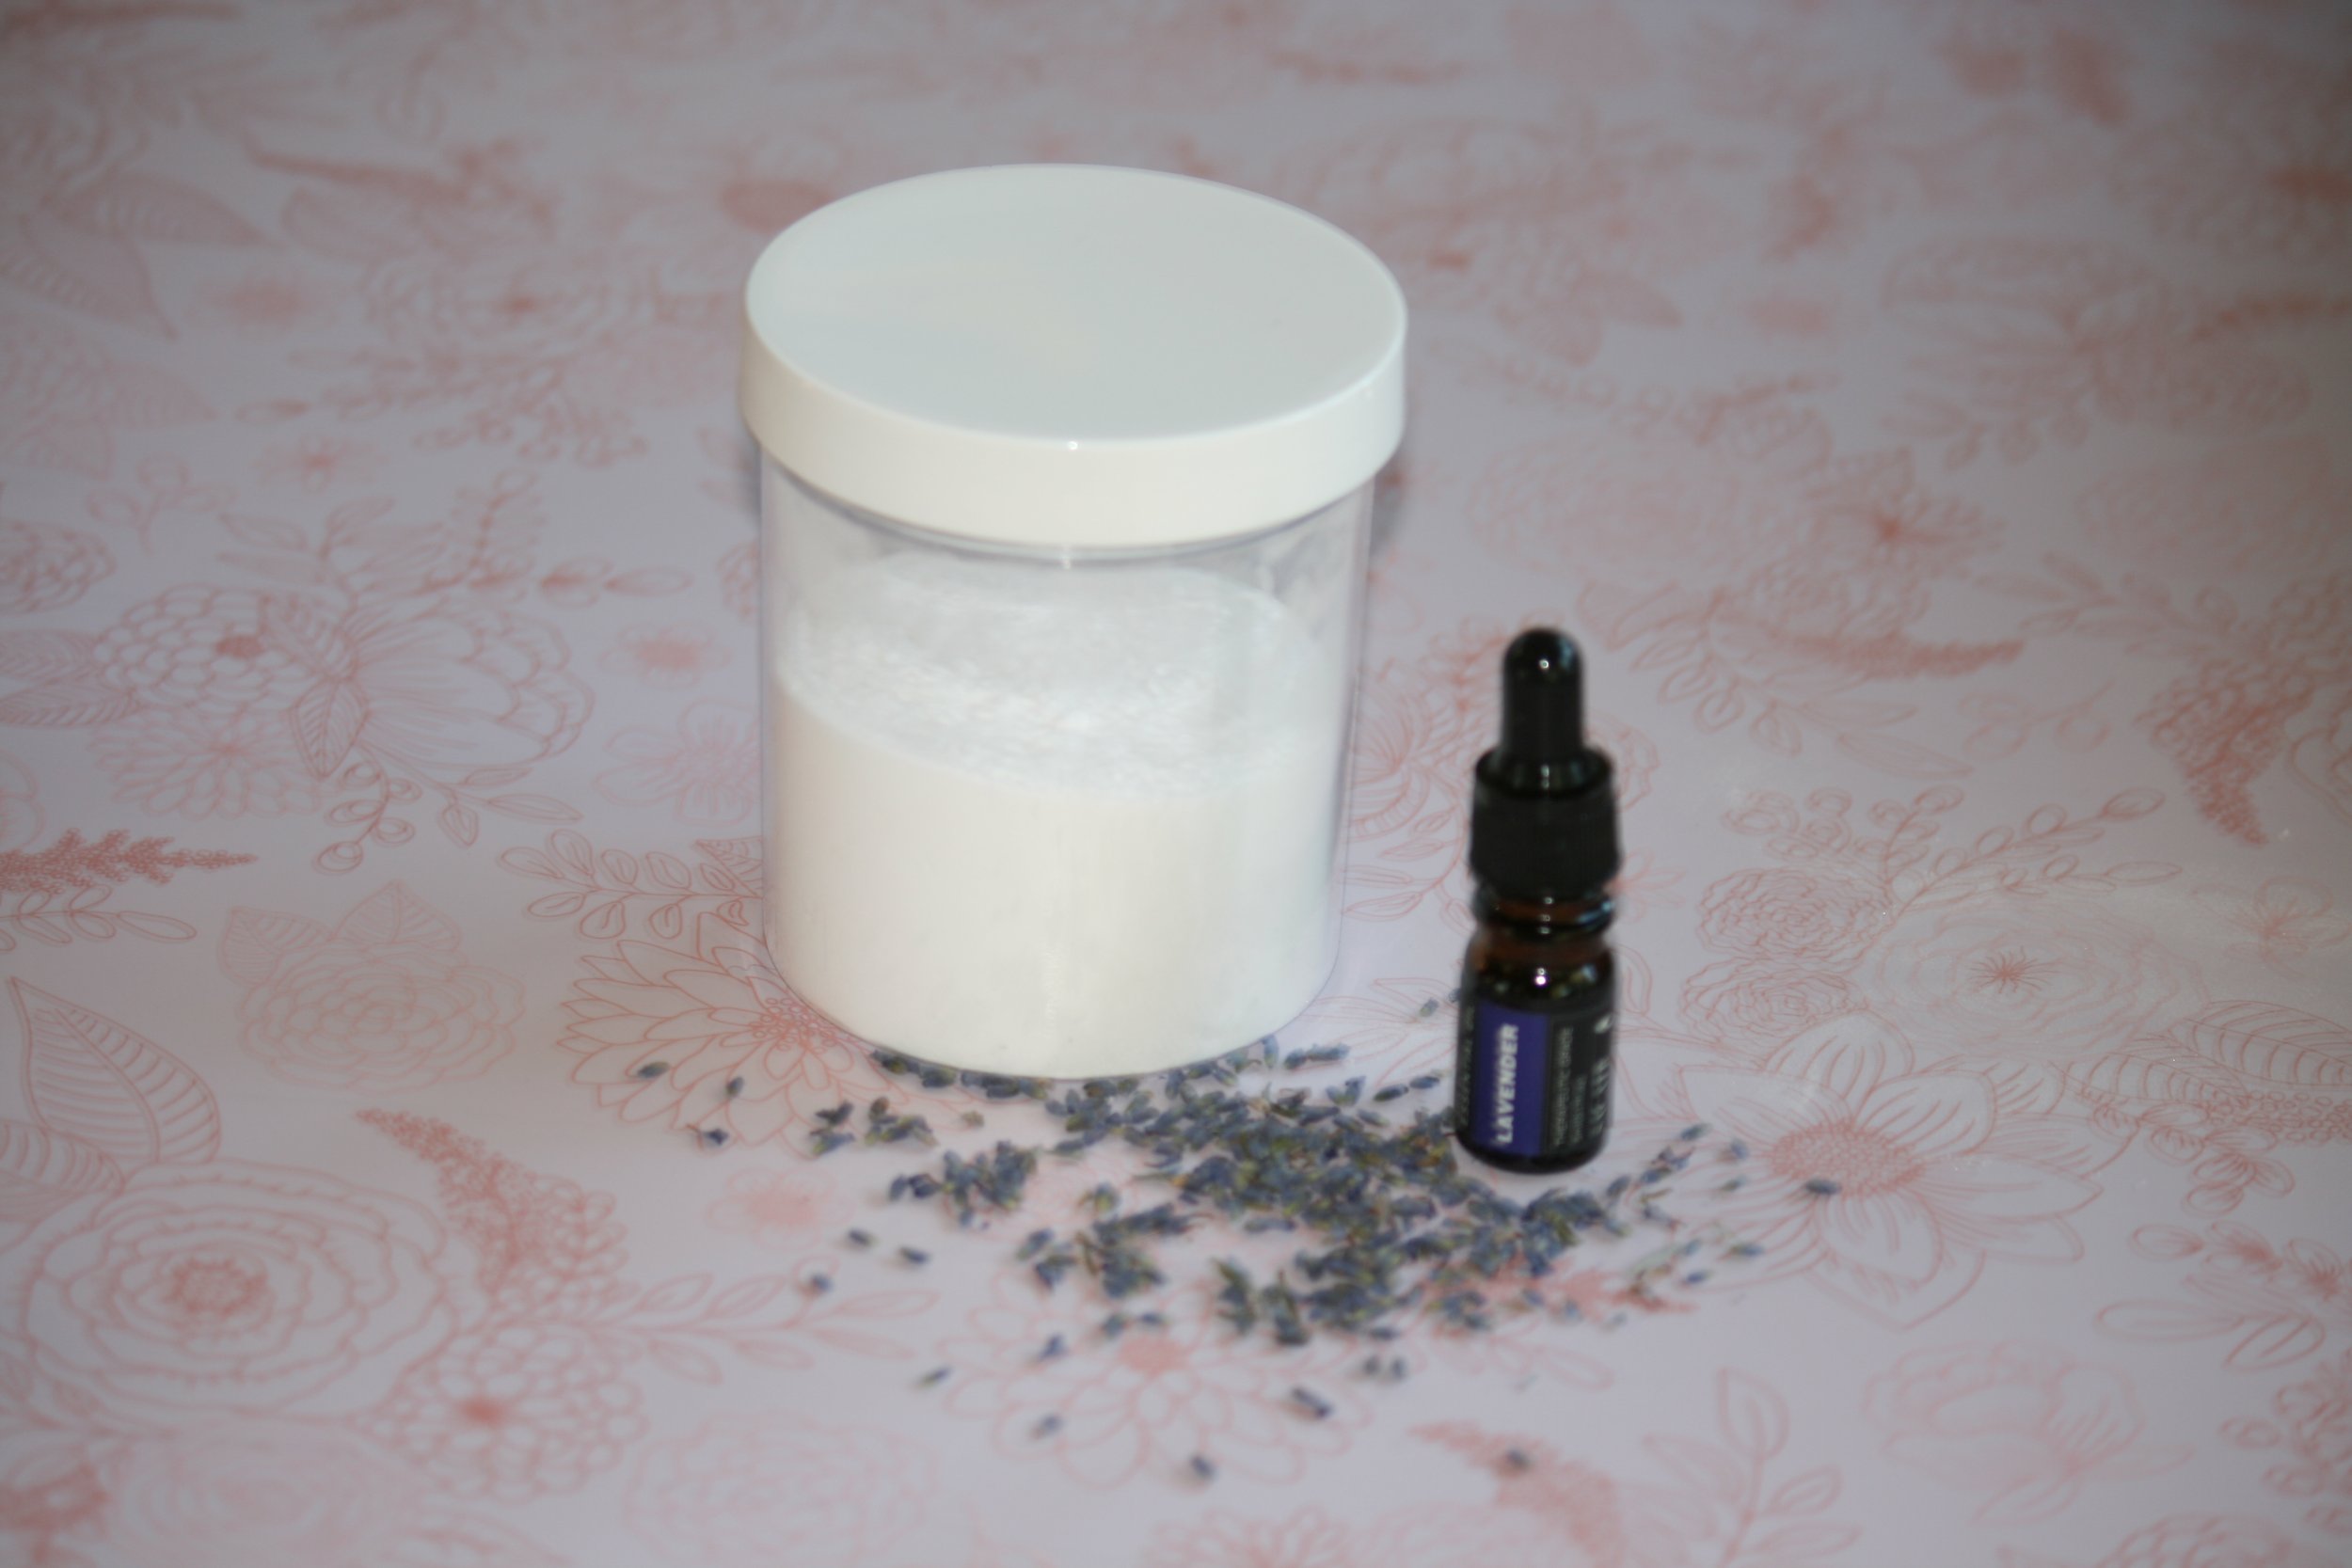 clear plastic jar containing baking soda, scattered lavender buds, amber dropper bottle with lavender oil